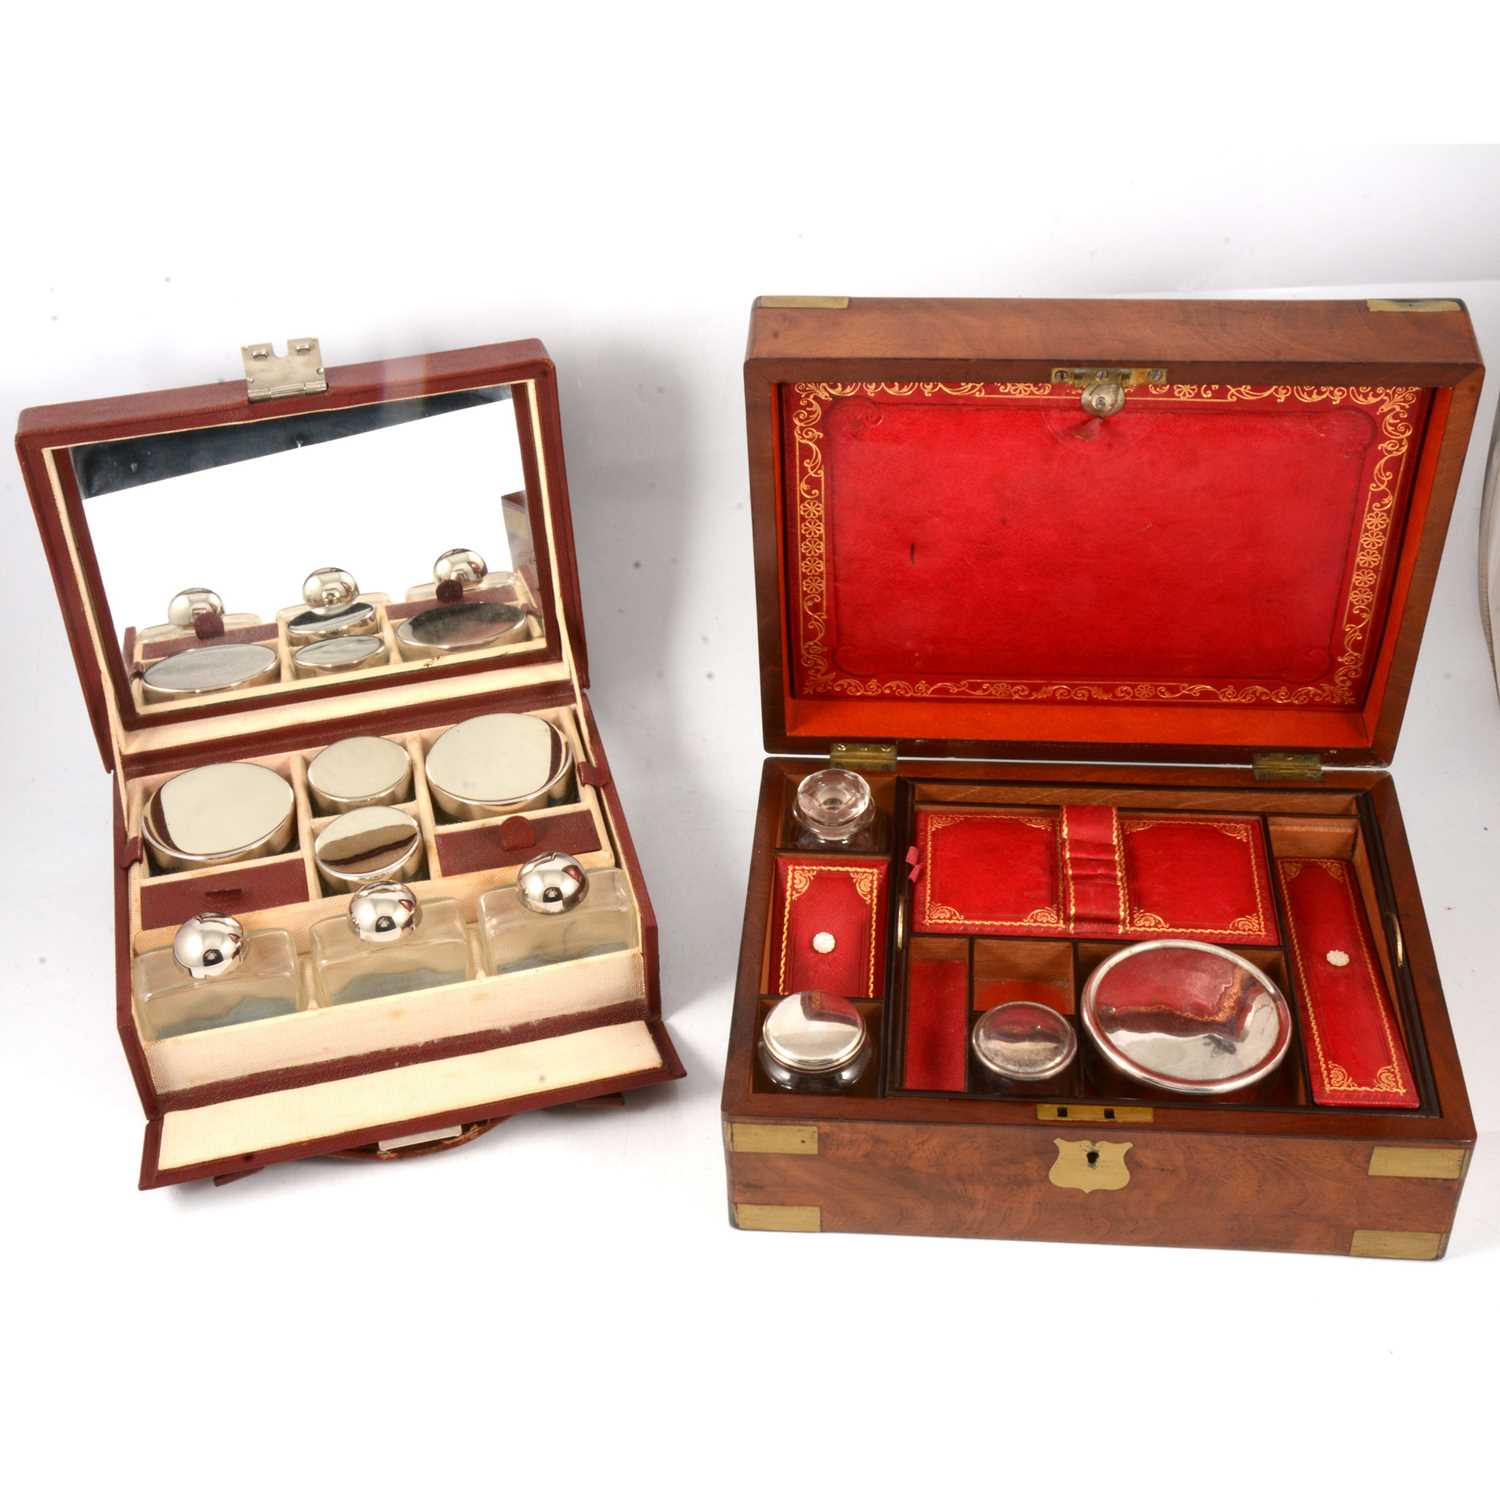 Lot 116 - A walnut writing box and lady's travelling toilet set, both with fitted interiors.